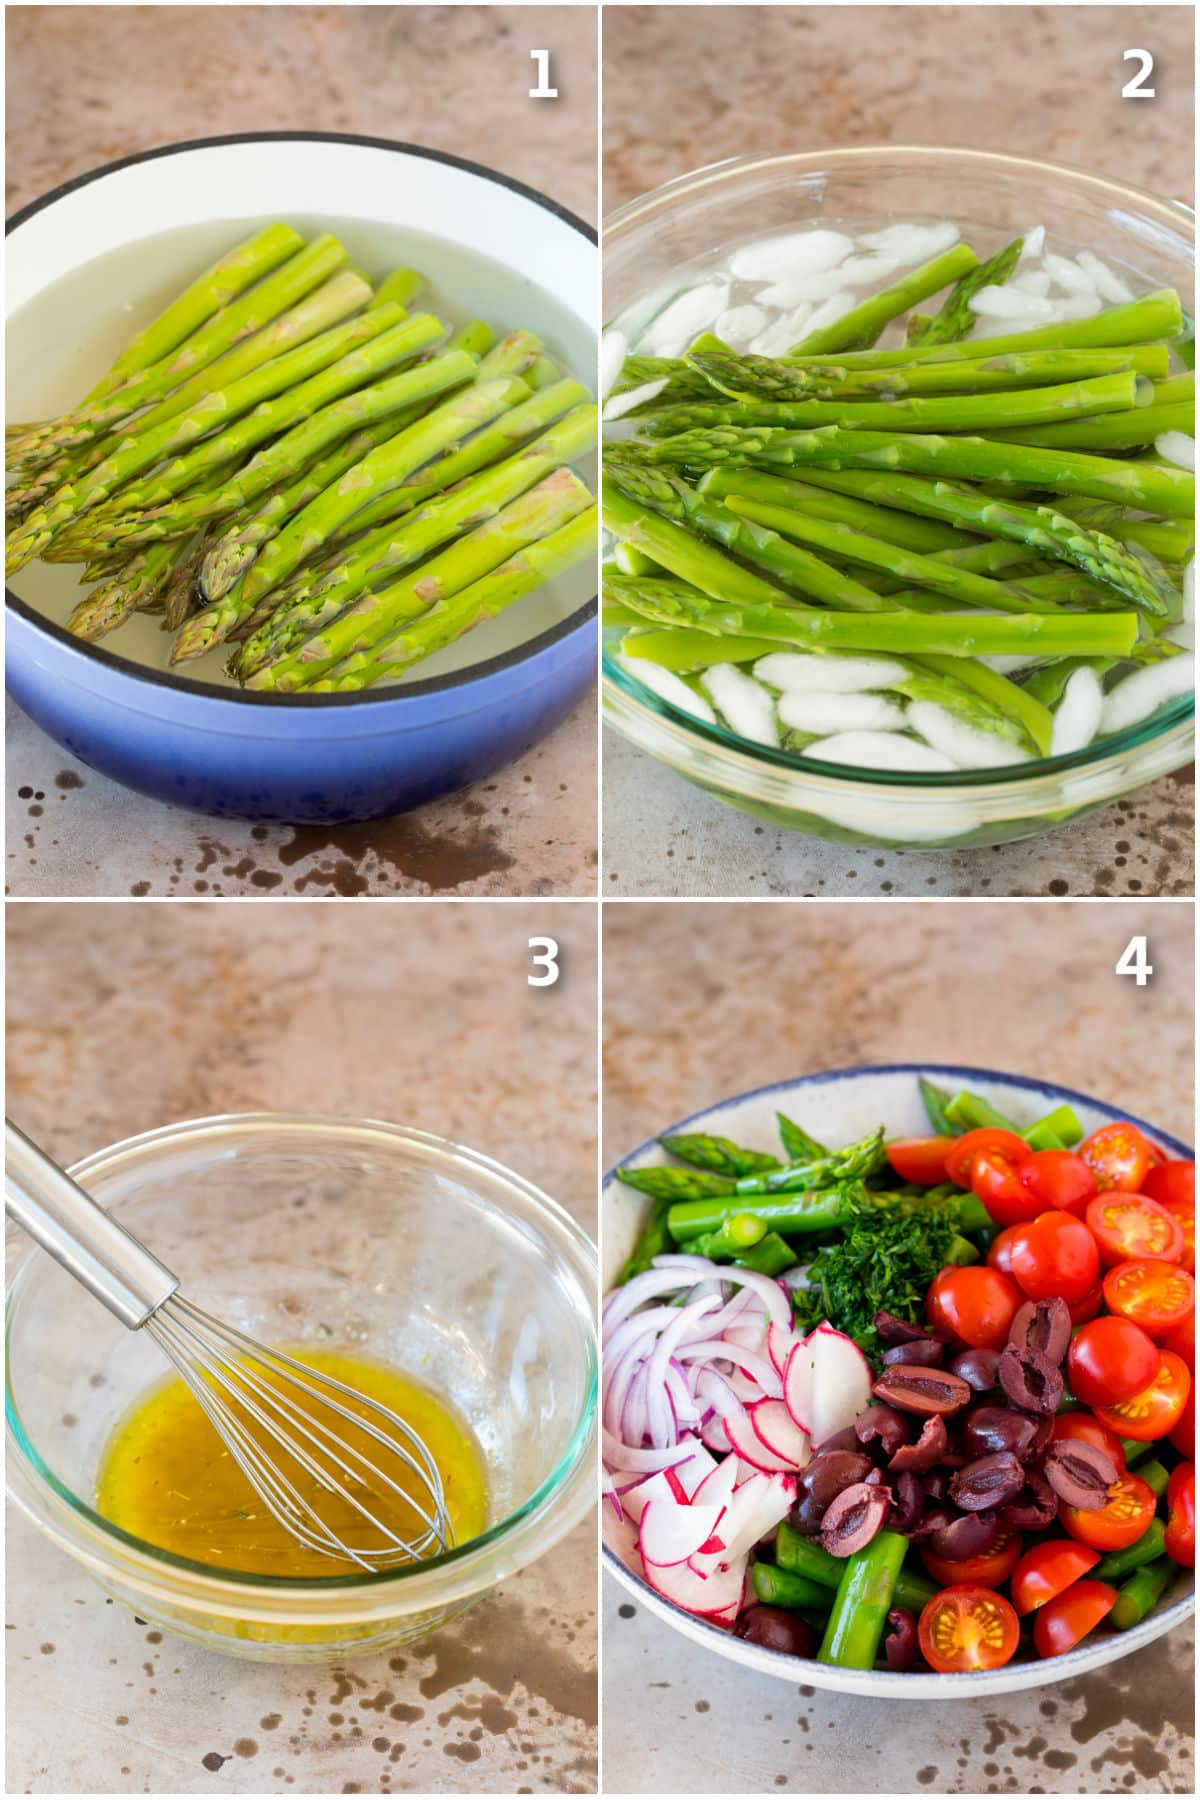 Step by step shots showing how to cook asparagus and make salad.